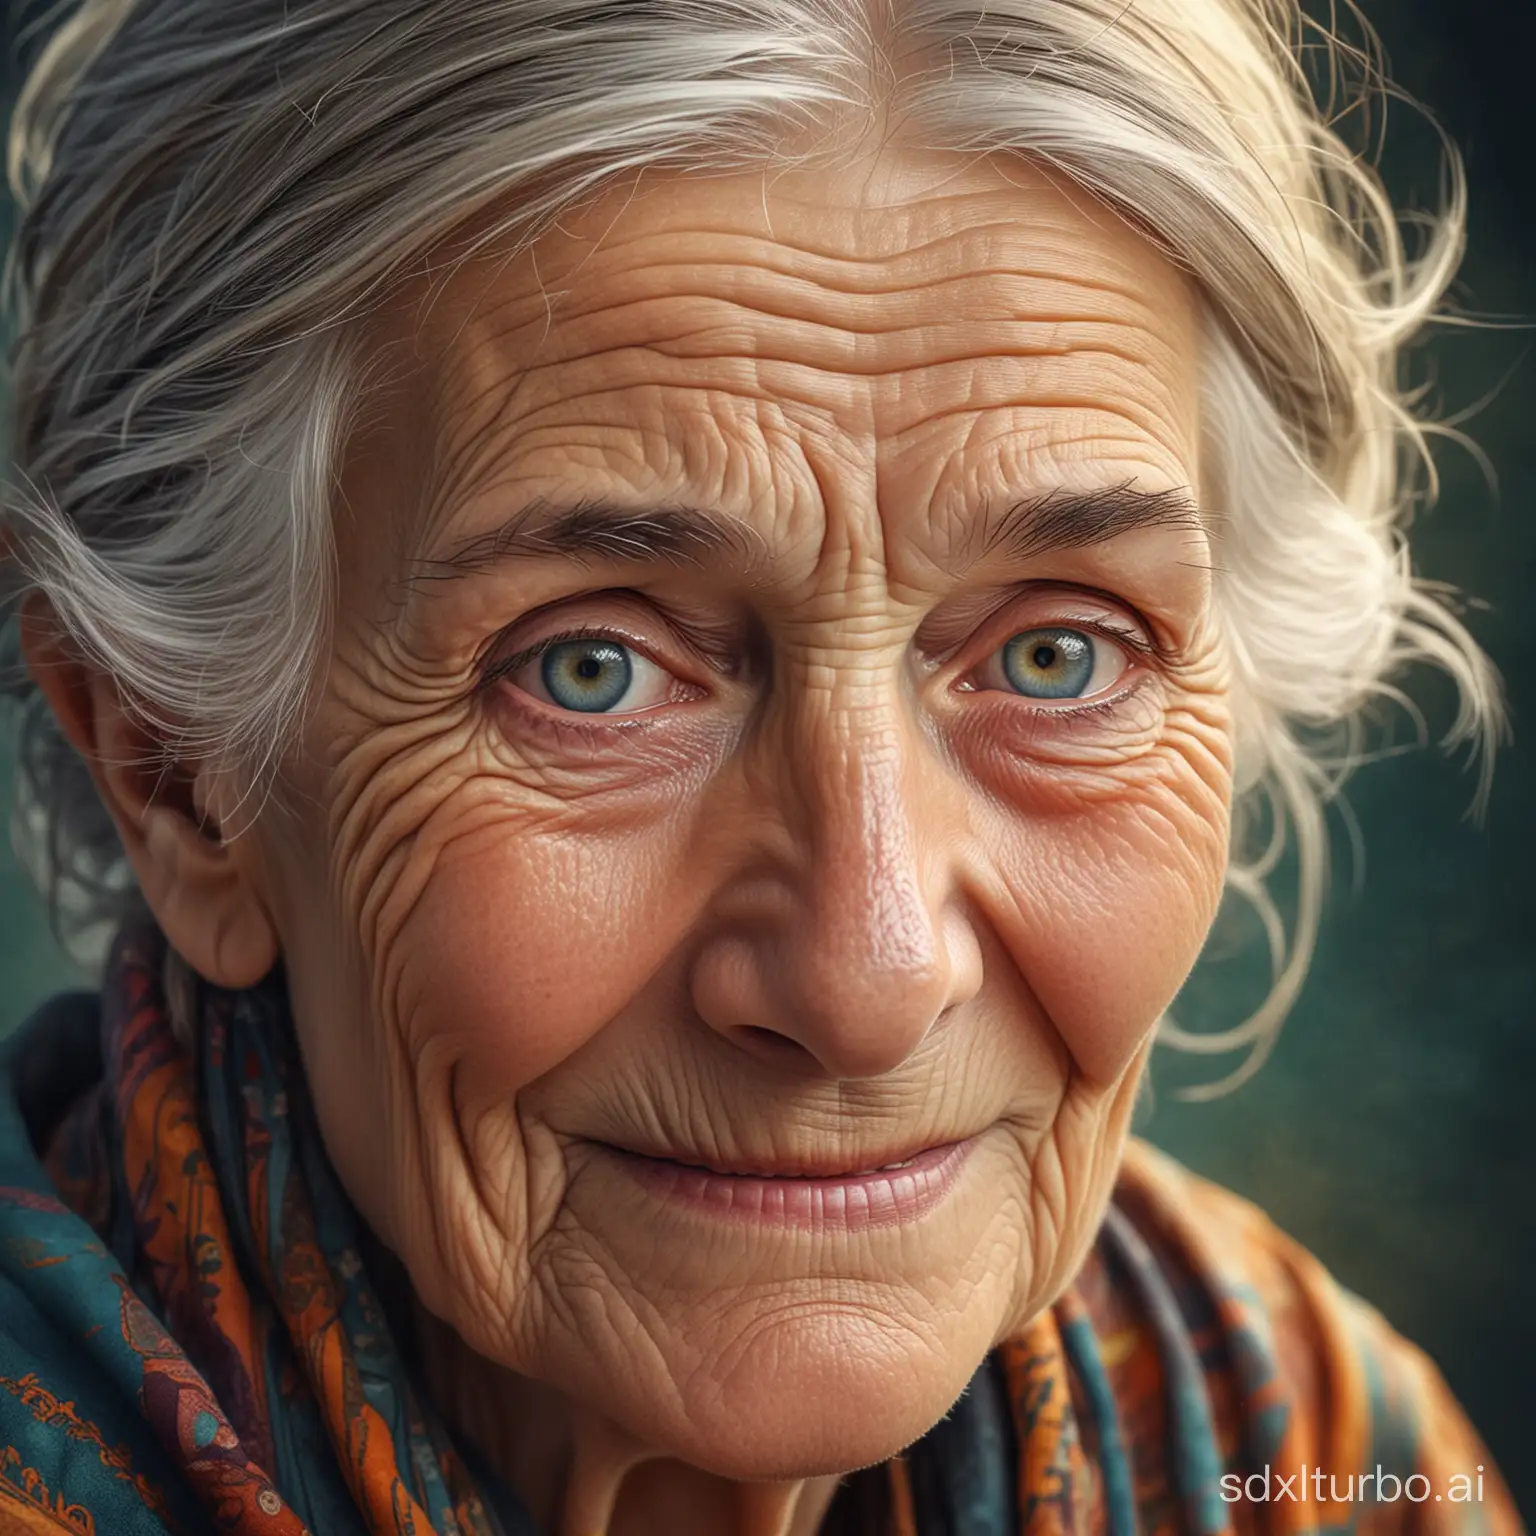 A portrait of an old woman's knowing smile, crow's feet framing empathetic eyes. Psychedelic Conceptual Digital vector Illustration with 3D Depth and complex layering, dynamic motion, organic fusion, profound compassion, muted palette, delicate lines, human face, elderly, wisdom, empathy, positivity, facial expression, emotion, psychology. --ar 9:16